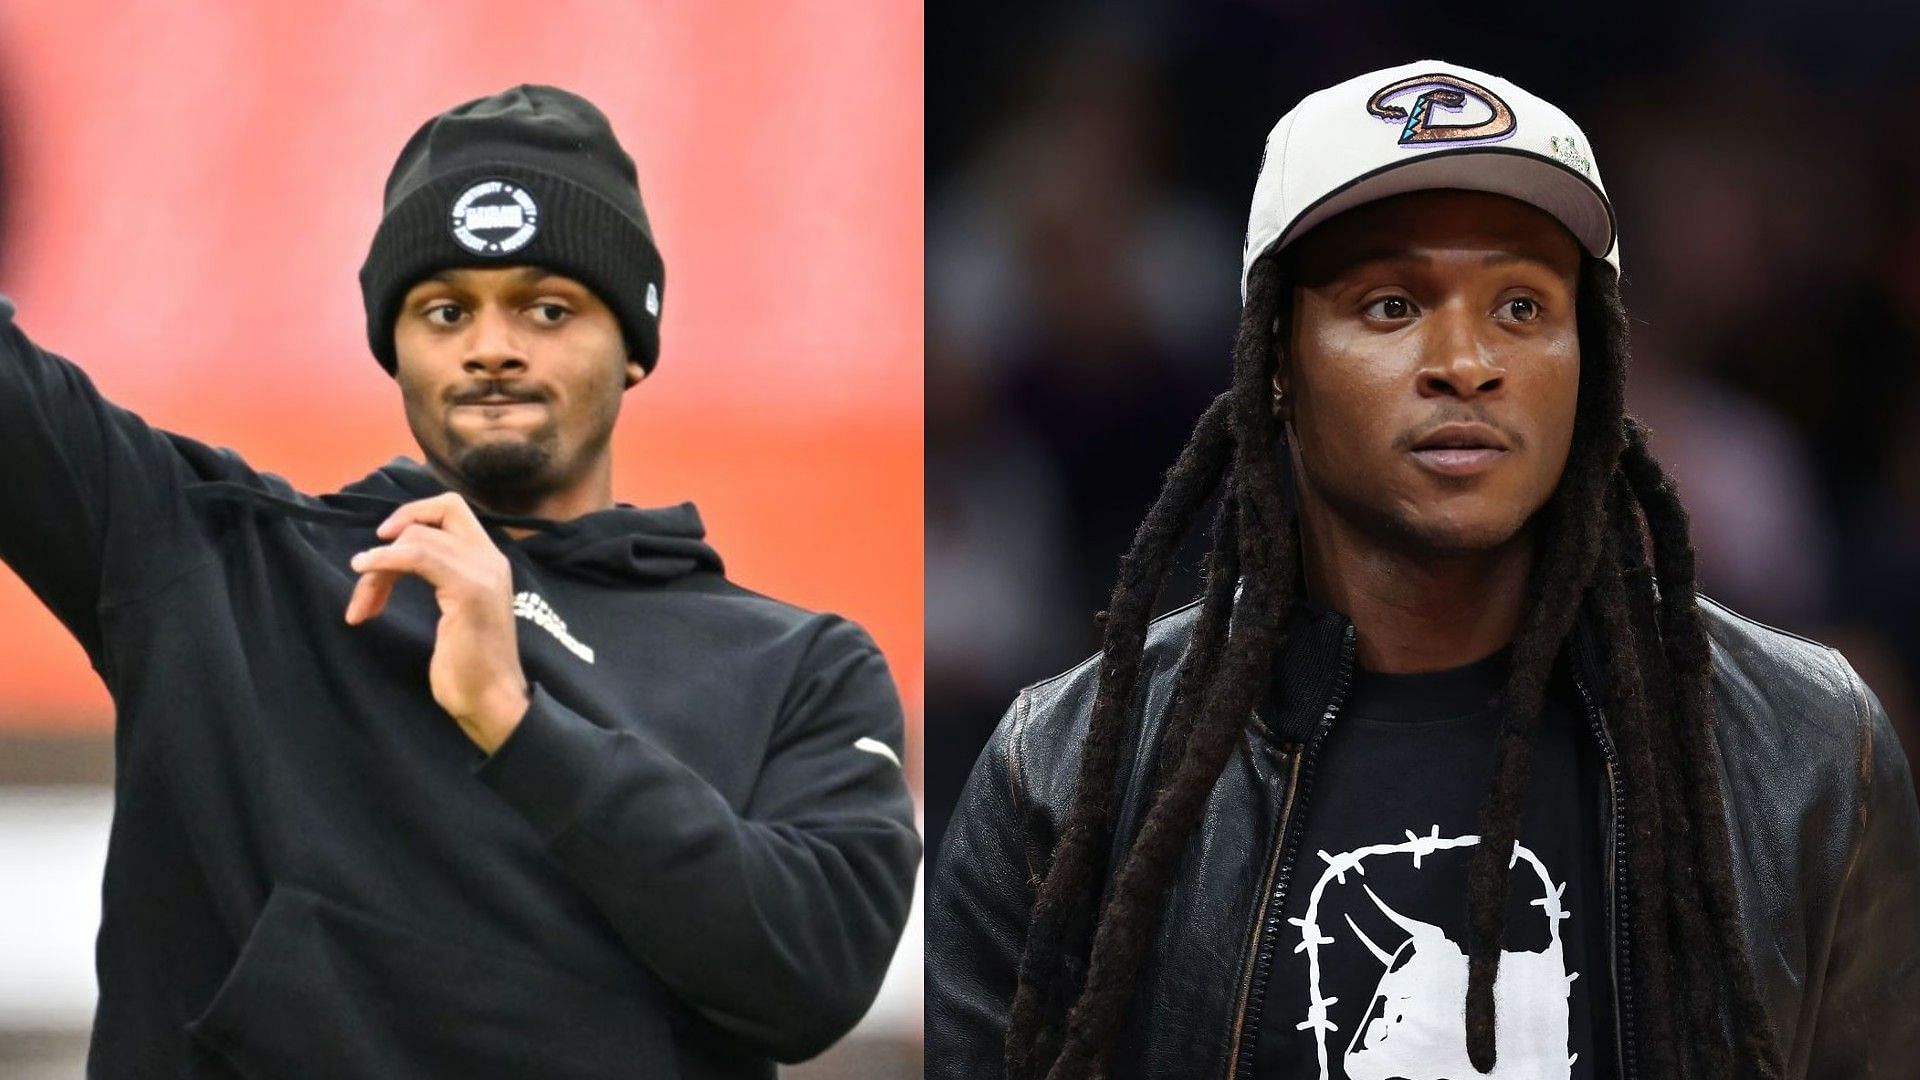 Deshaun Watson and DeAndre Hopkins potentially heading for a reunion, NFL analyst claims